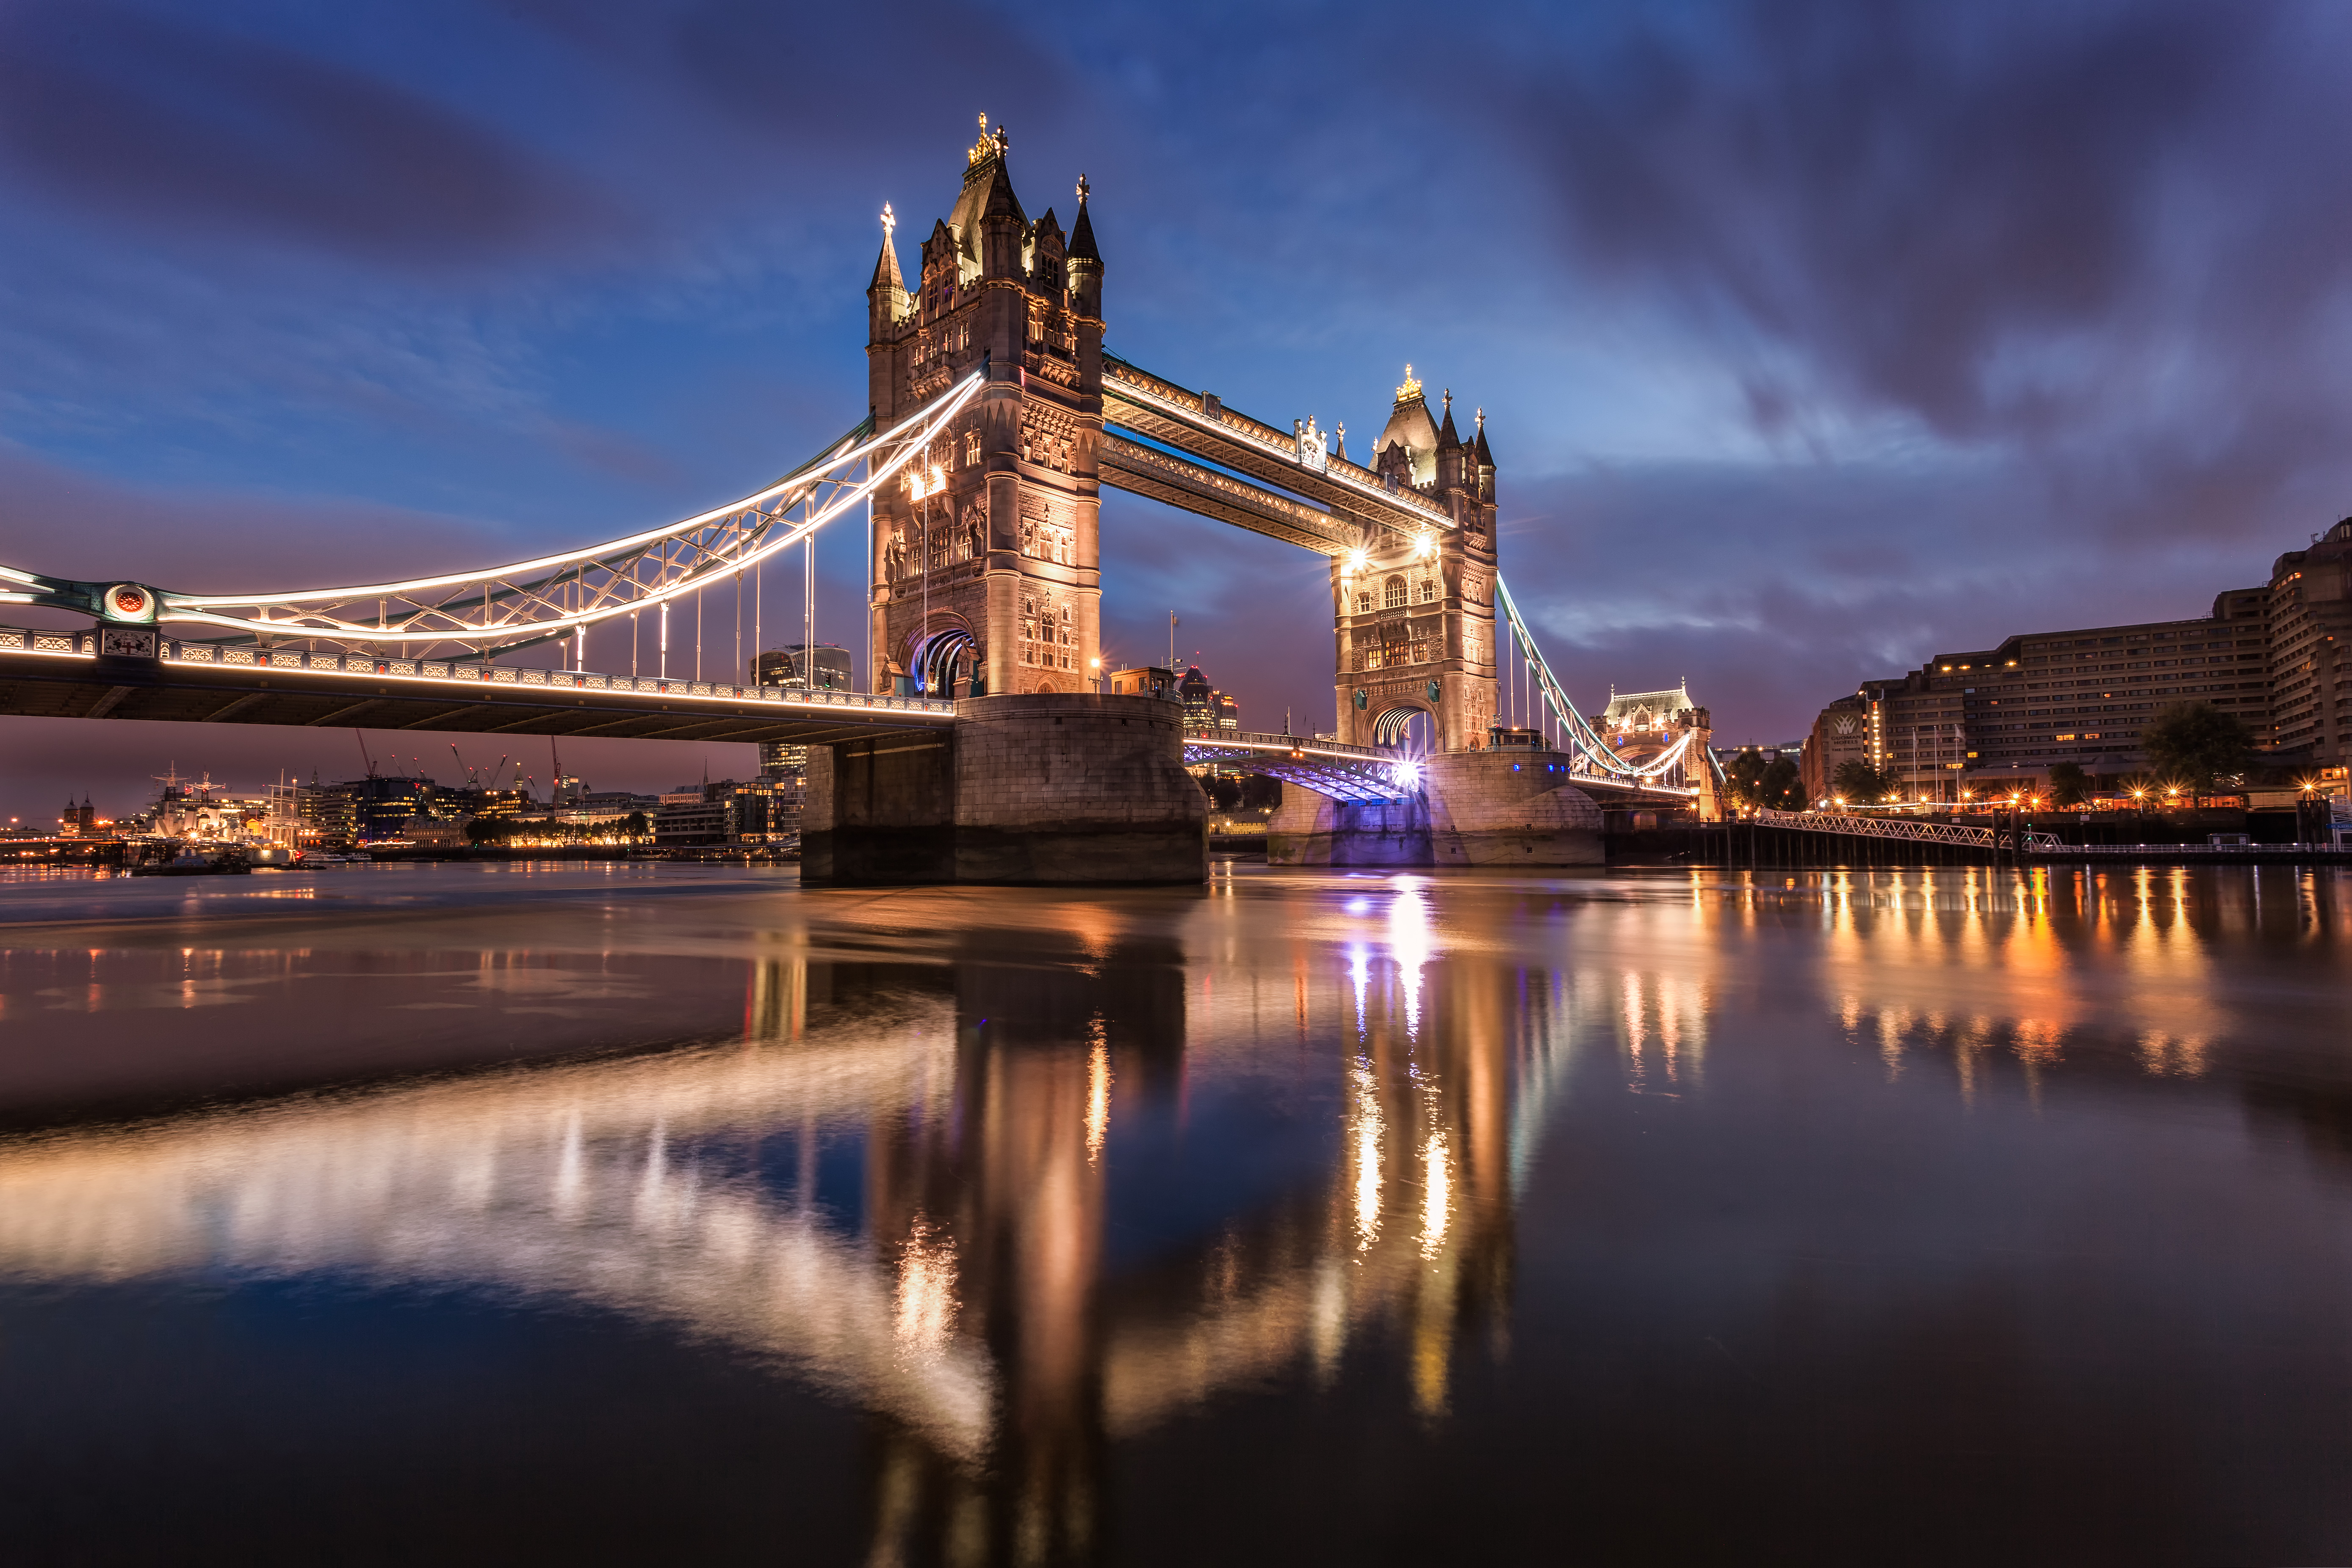 A timelapse of Tower Bridge at night